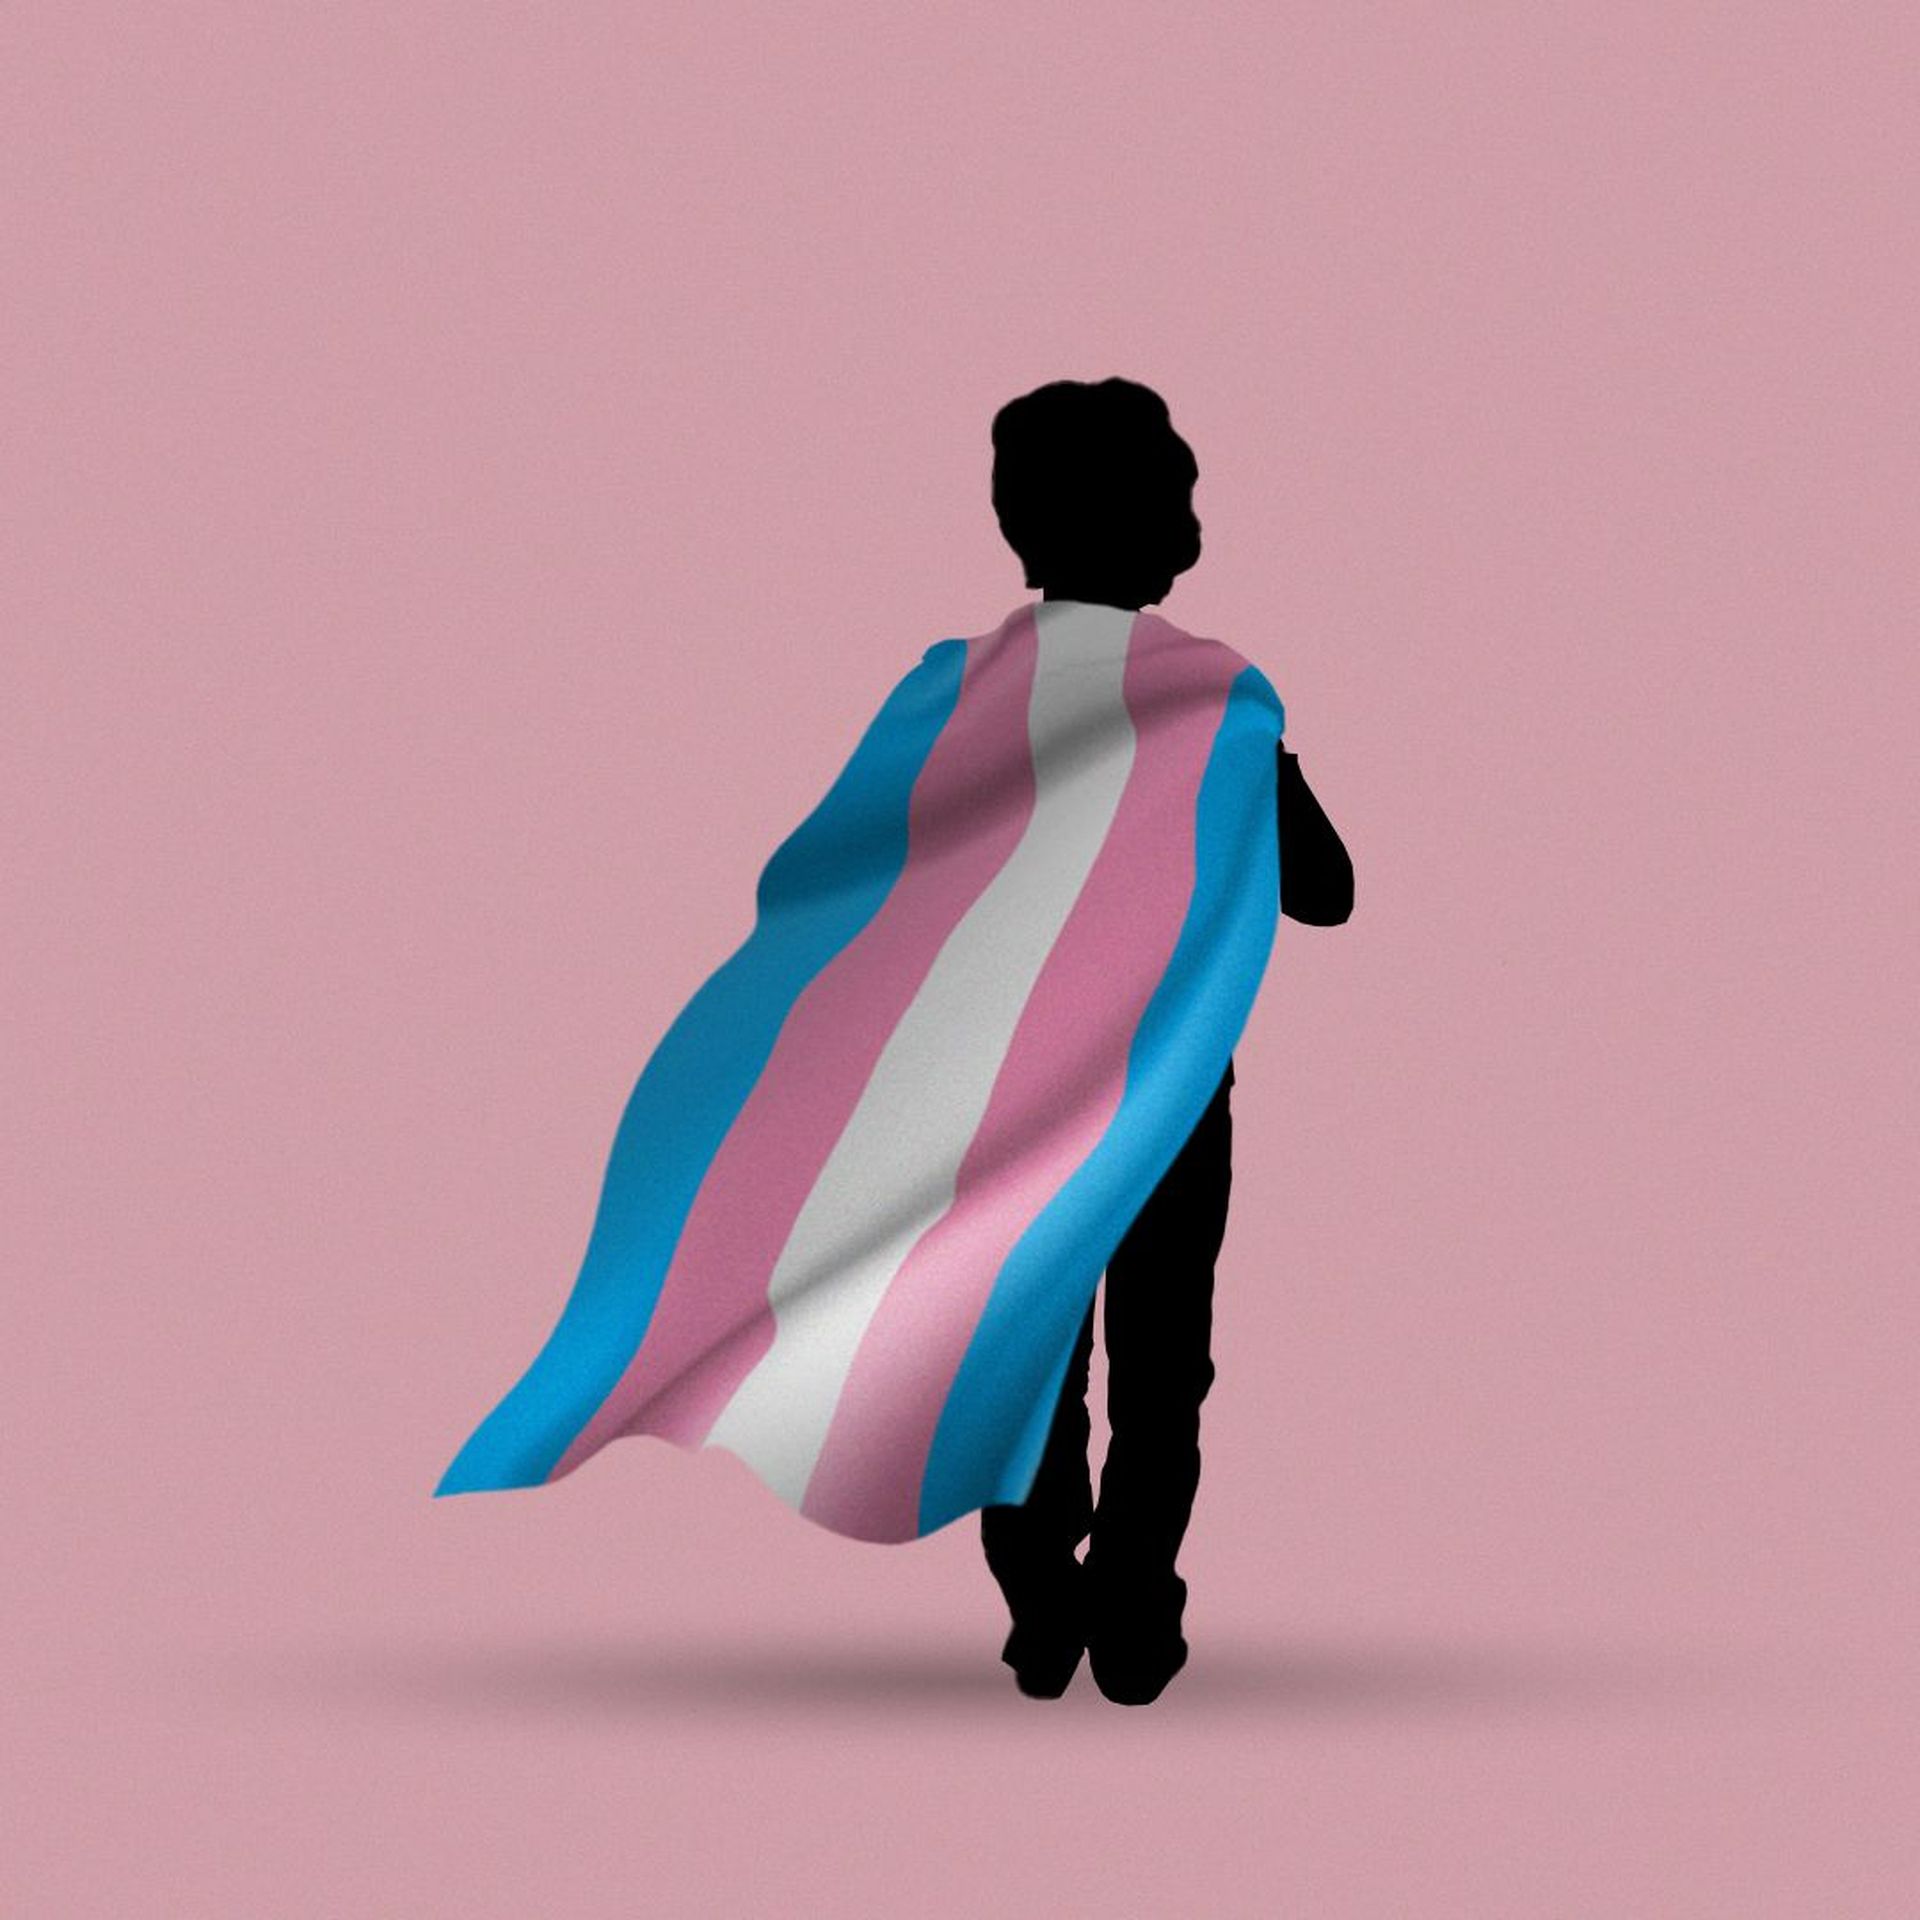 Illustration of a child in silhouette holding a transgender pride flag over their shoulders like a cape